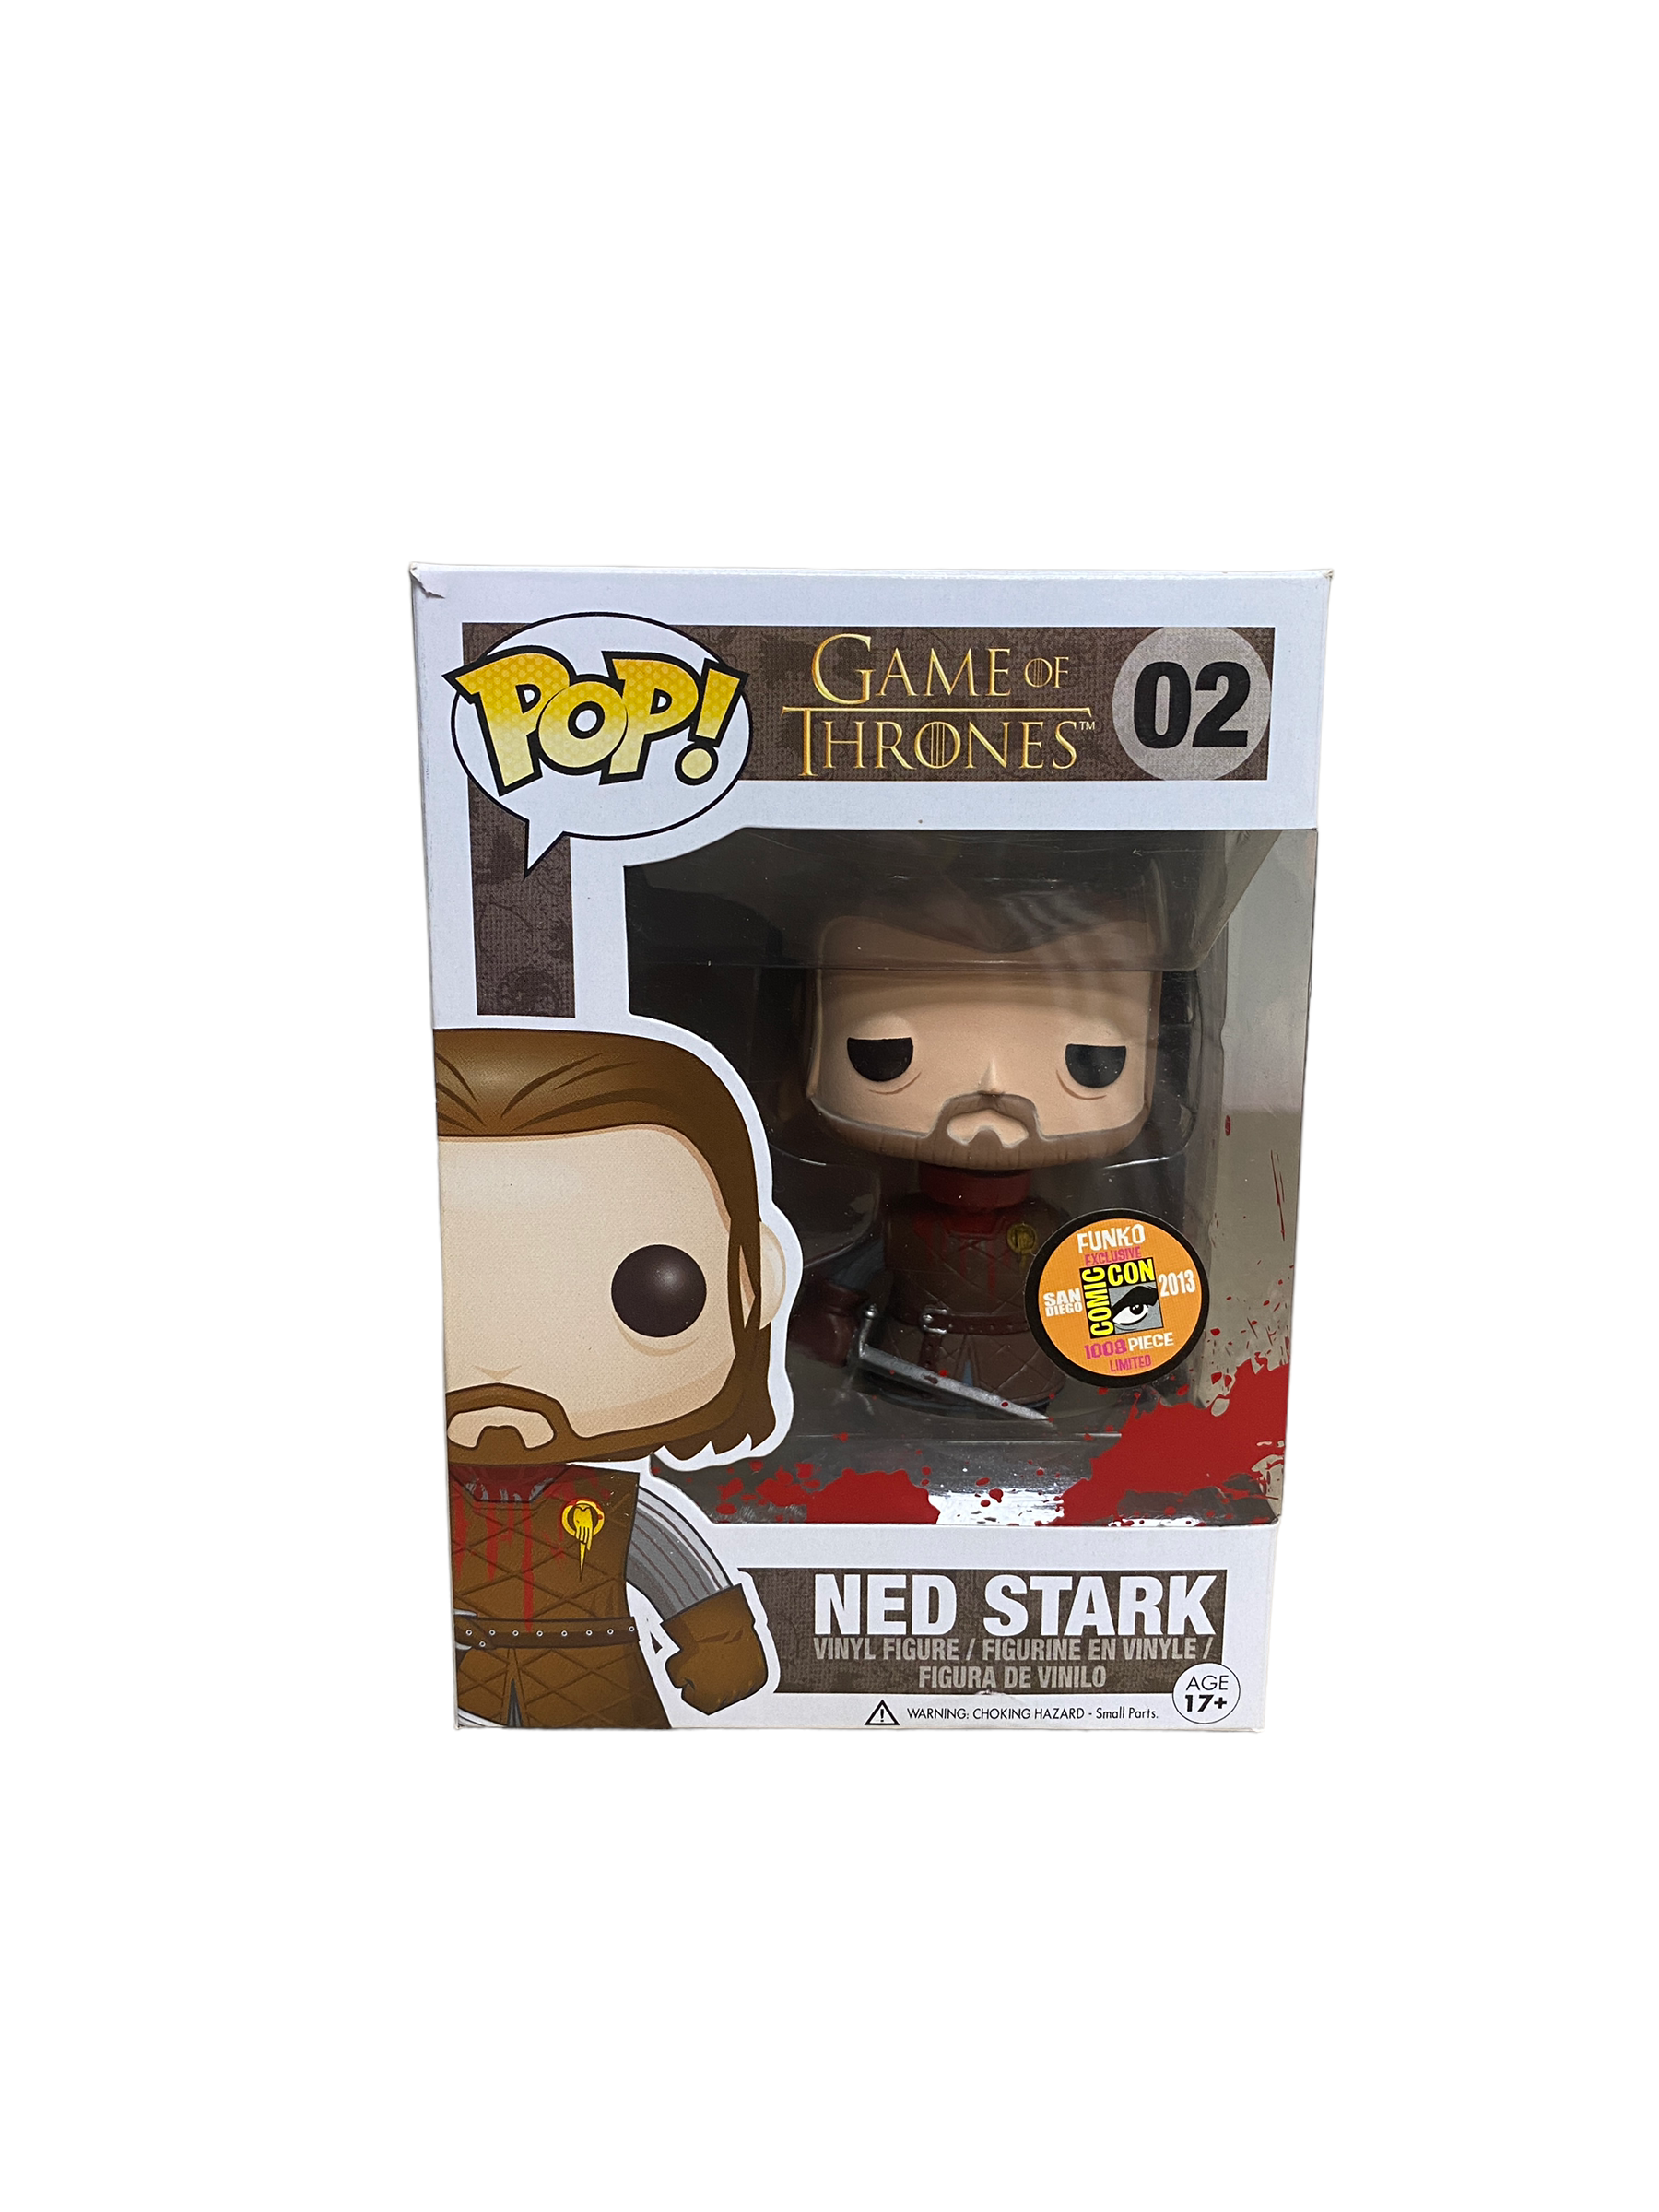 Ned Stark #02 (Headless) Funko Pop! - Game Of Thrones - SDCC 2013 Exclusive LE1008 Pcs - Condition 8.5/10